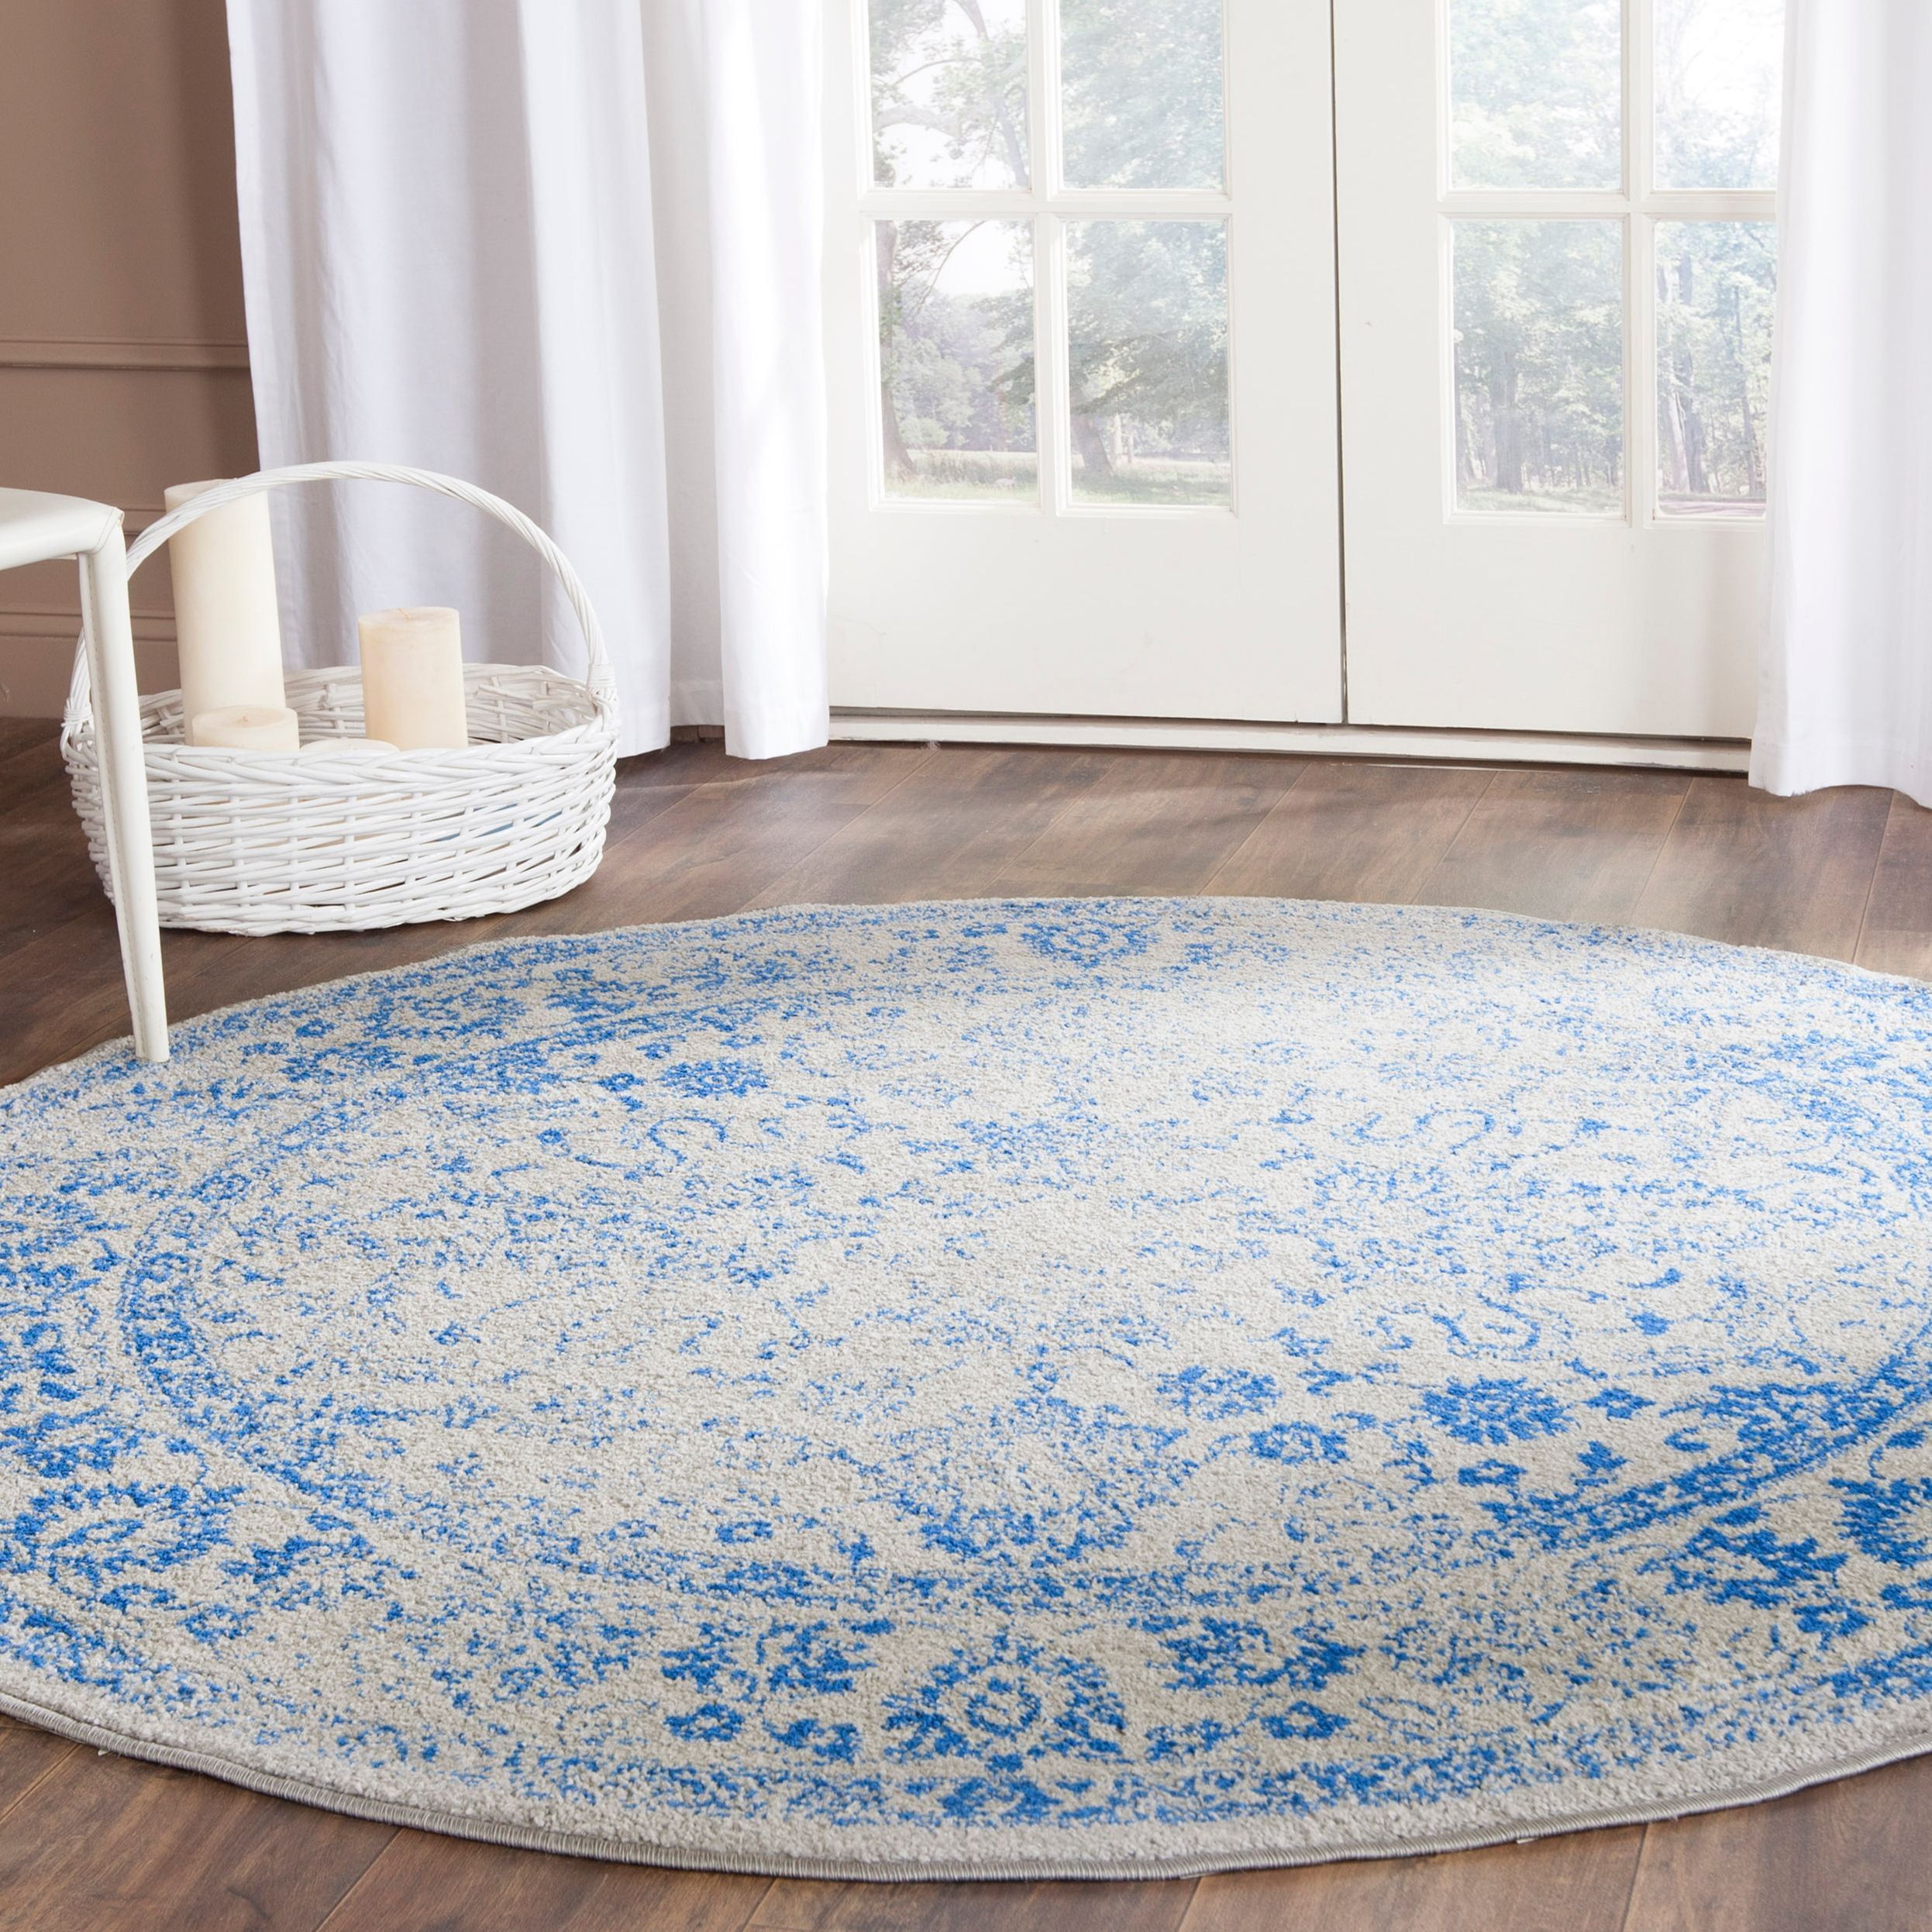 Chic Grey & Blue Oriental Synthetic 6' Round Area Rug